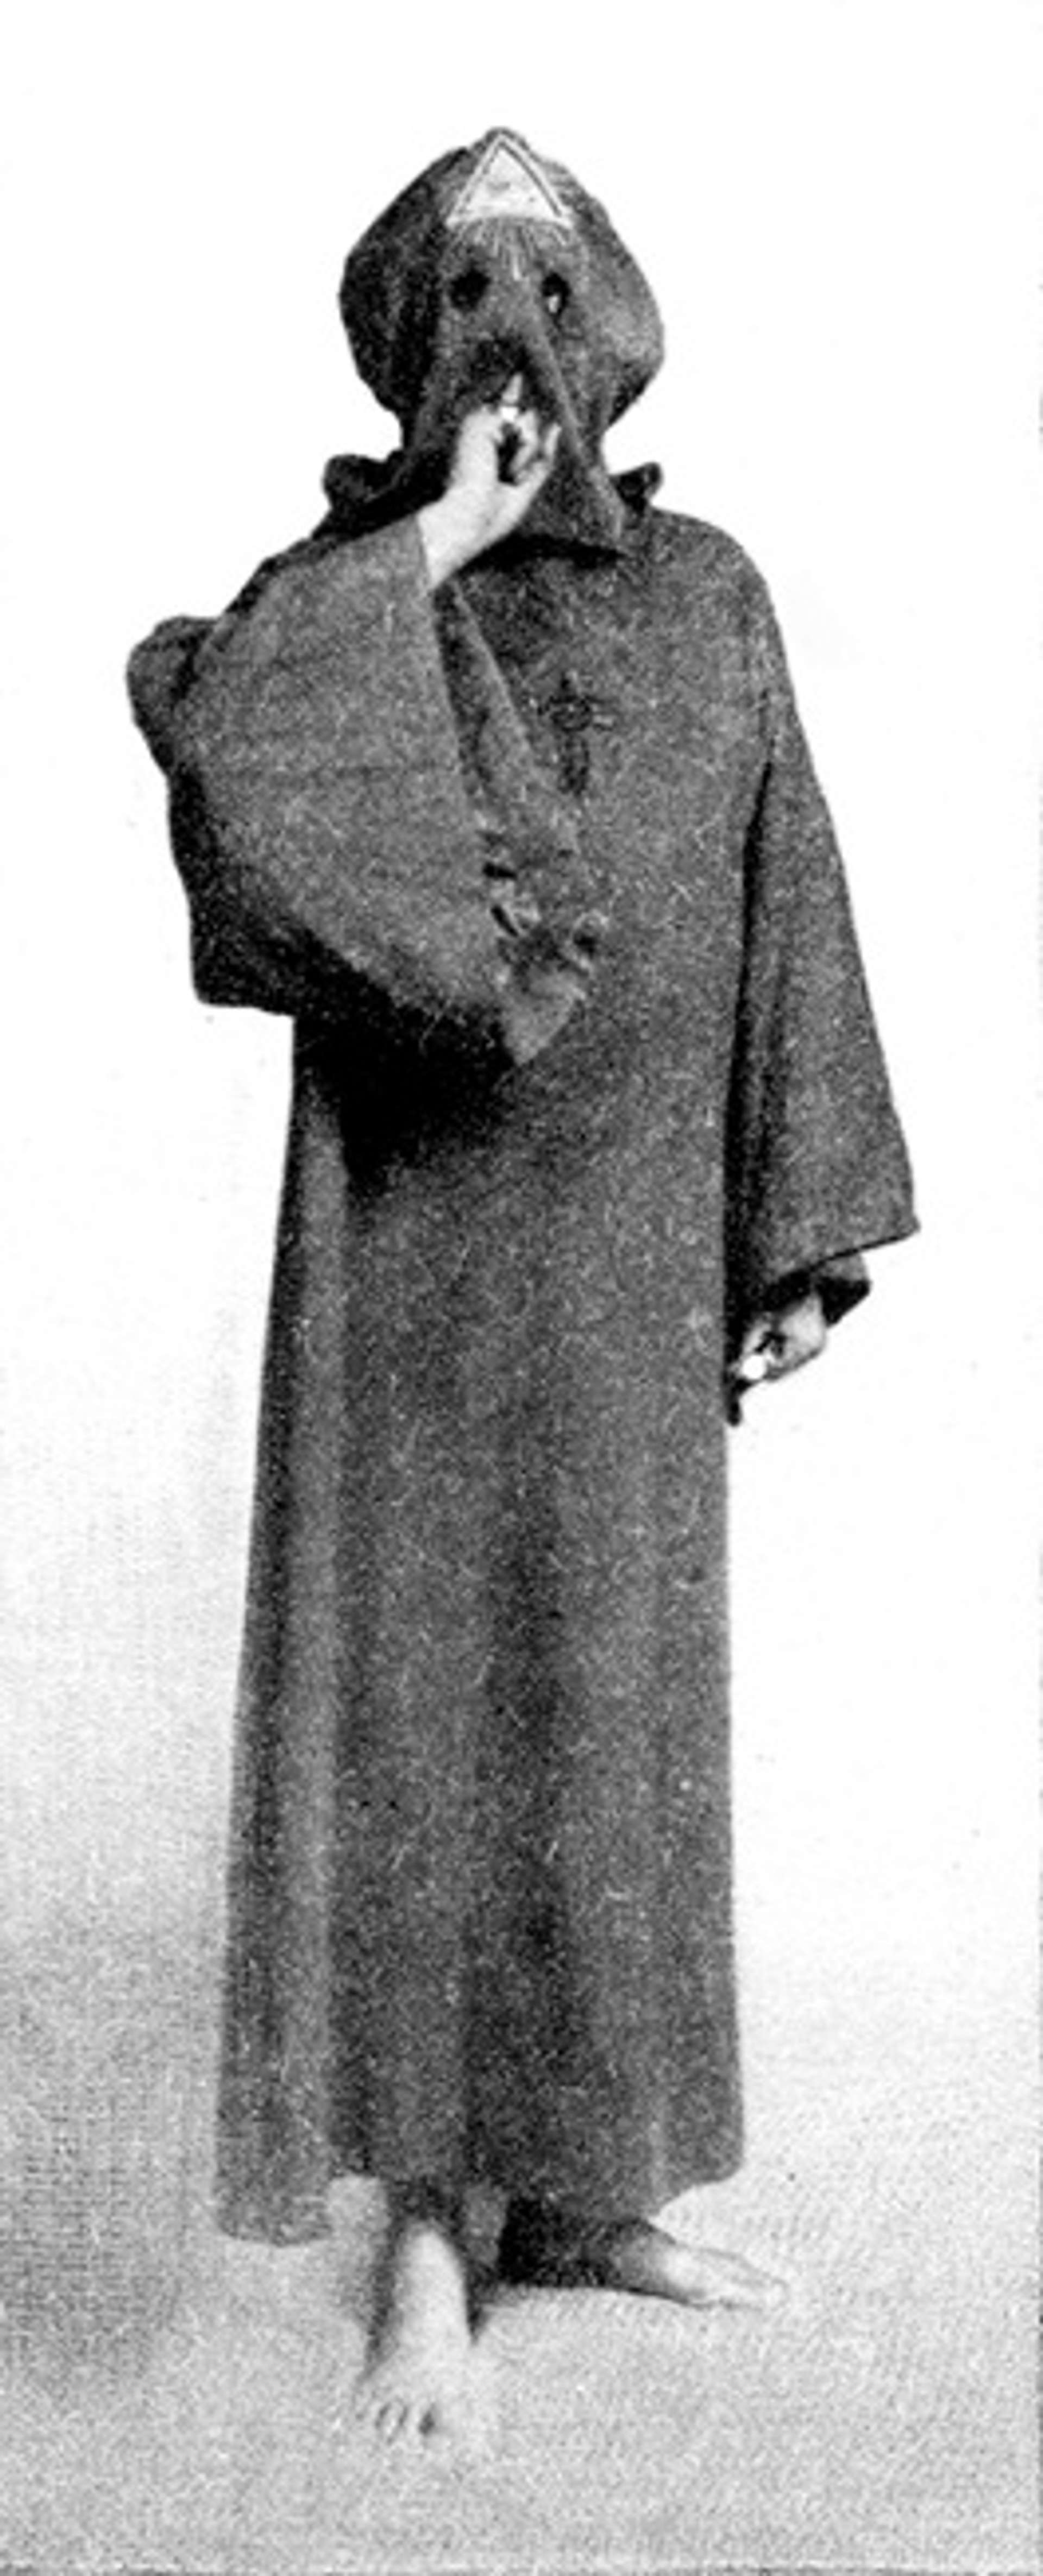 Crowley's photo wearing a robe in An Account of A∴A∴, The Equinox, Vol I, No 1, 1909